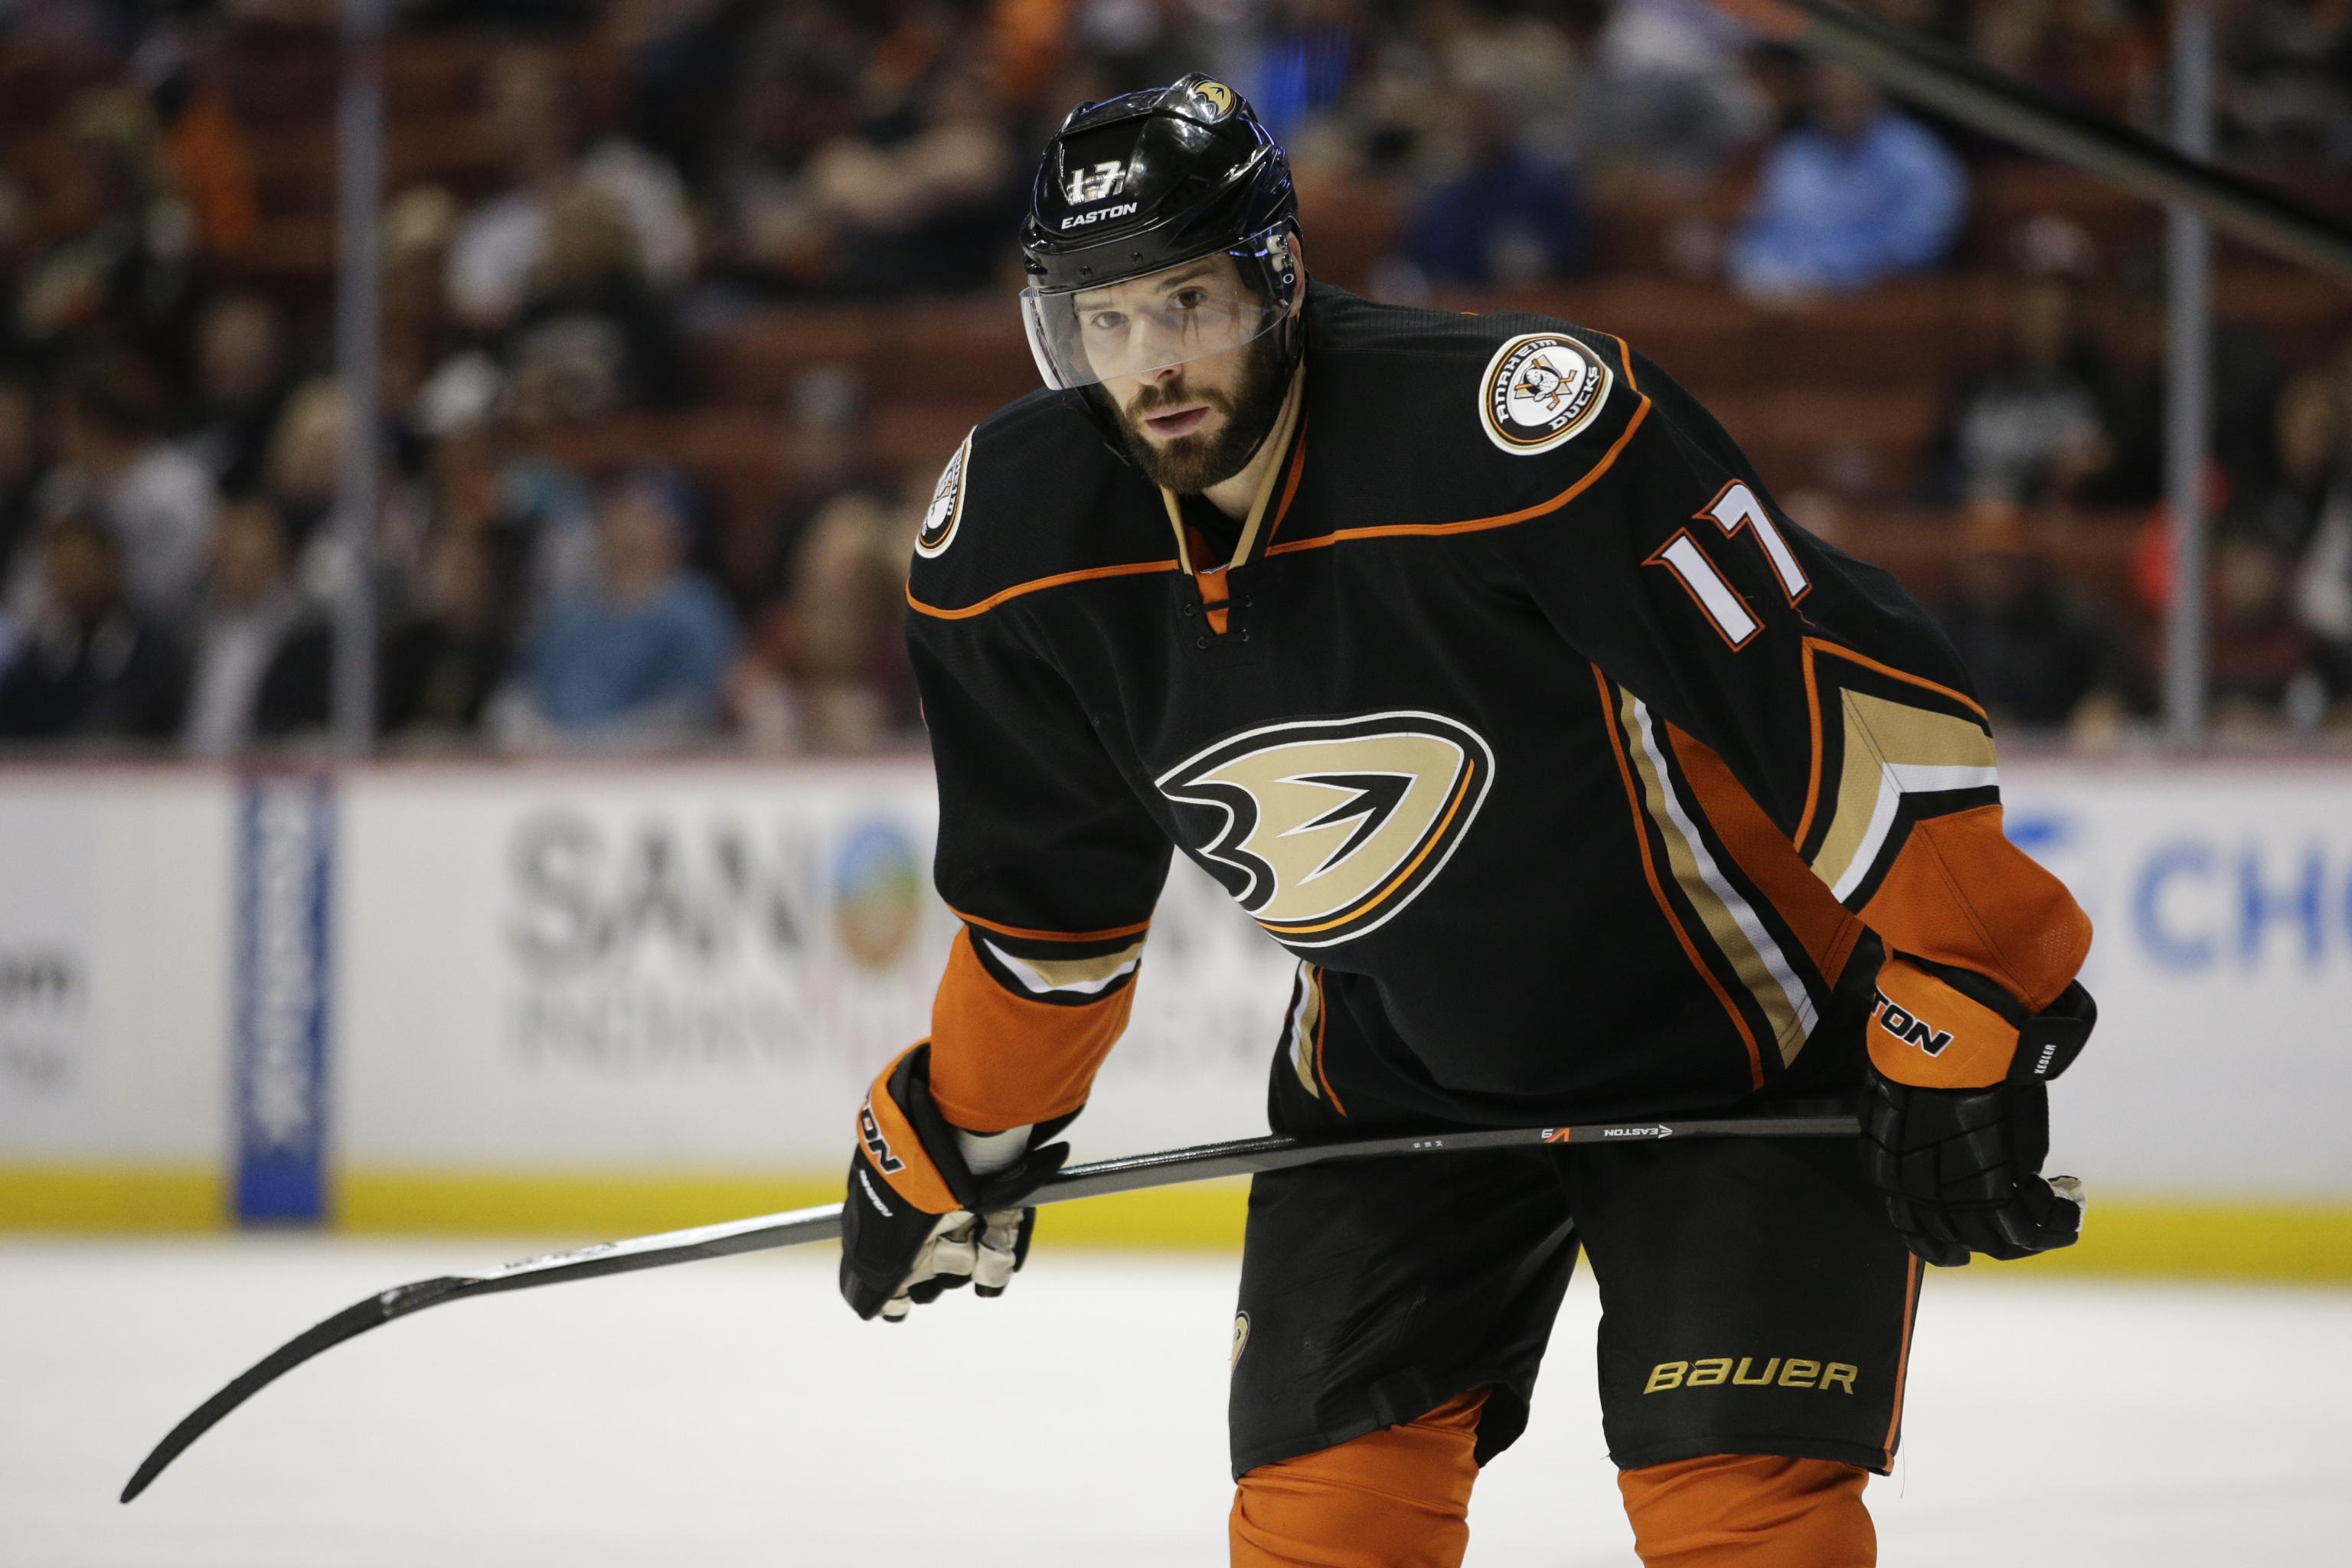 See Ryan Kesler in the brand new Anaheim Ducks jersey for the first time -  The Hockey News